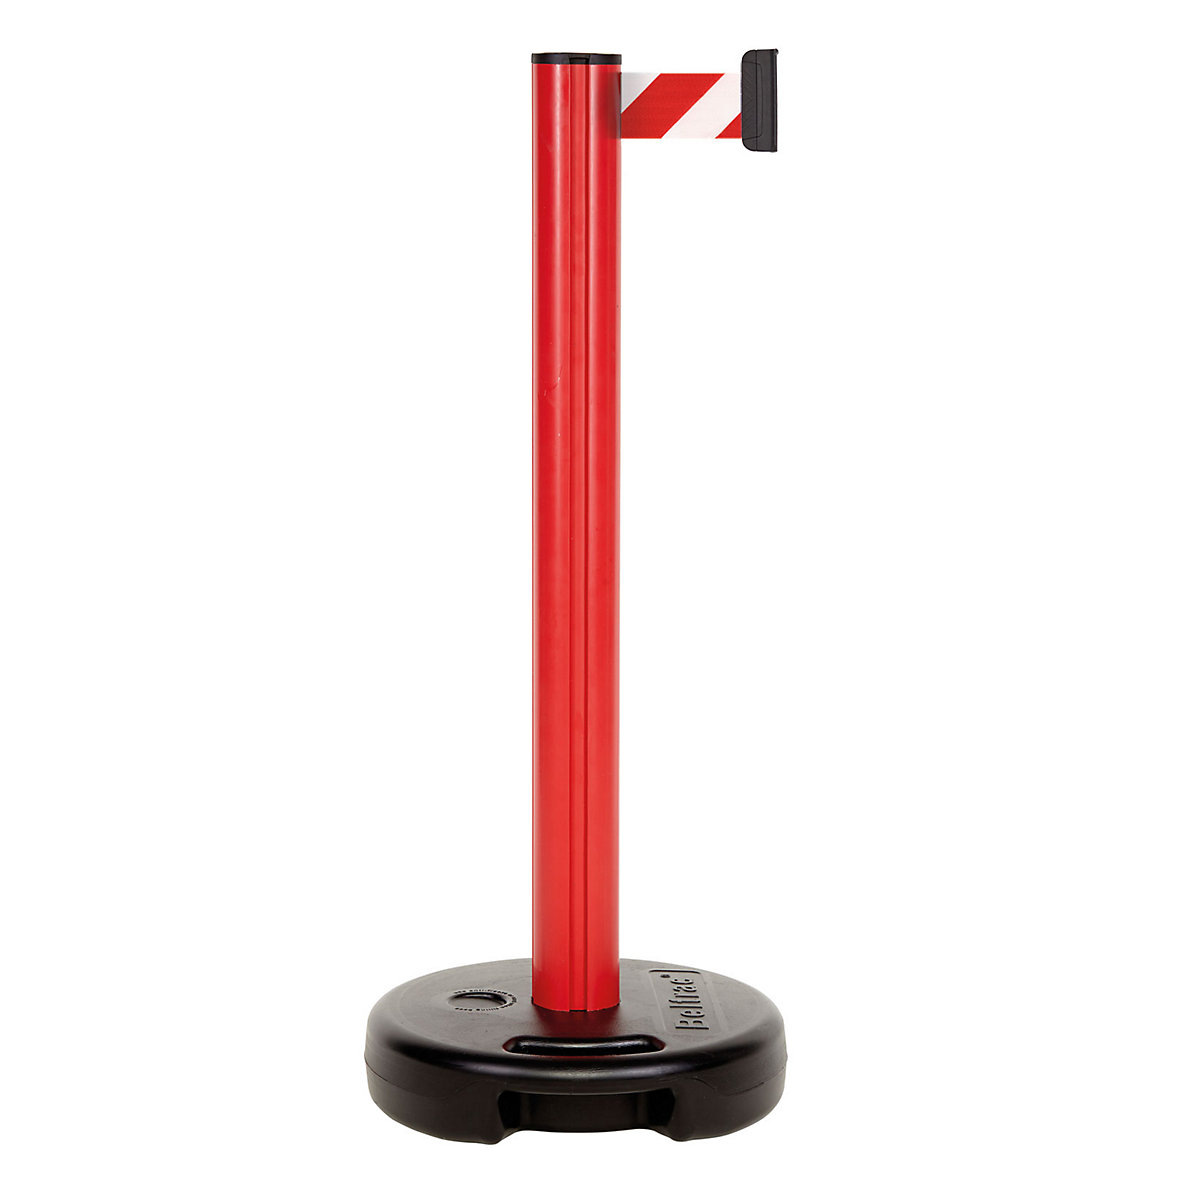 Belt post made of plastic, belt extends to max. 3700 mm, post red, belt red / white